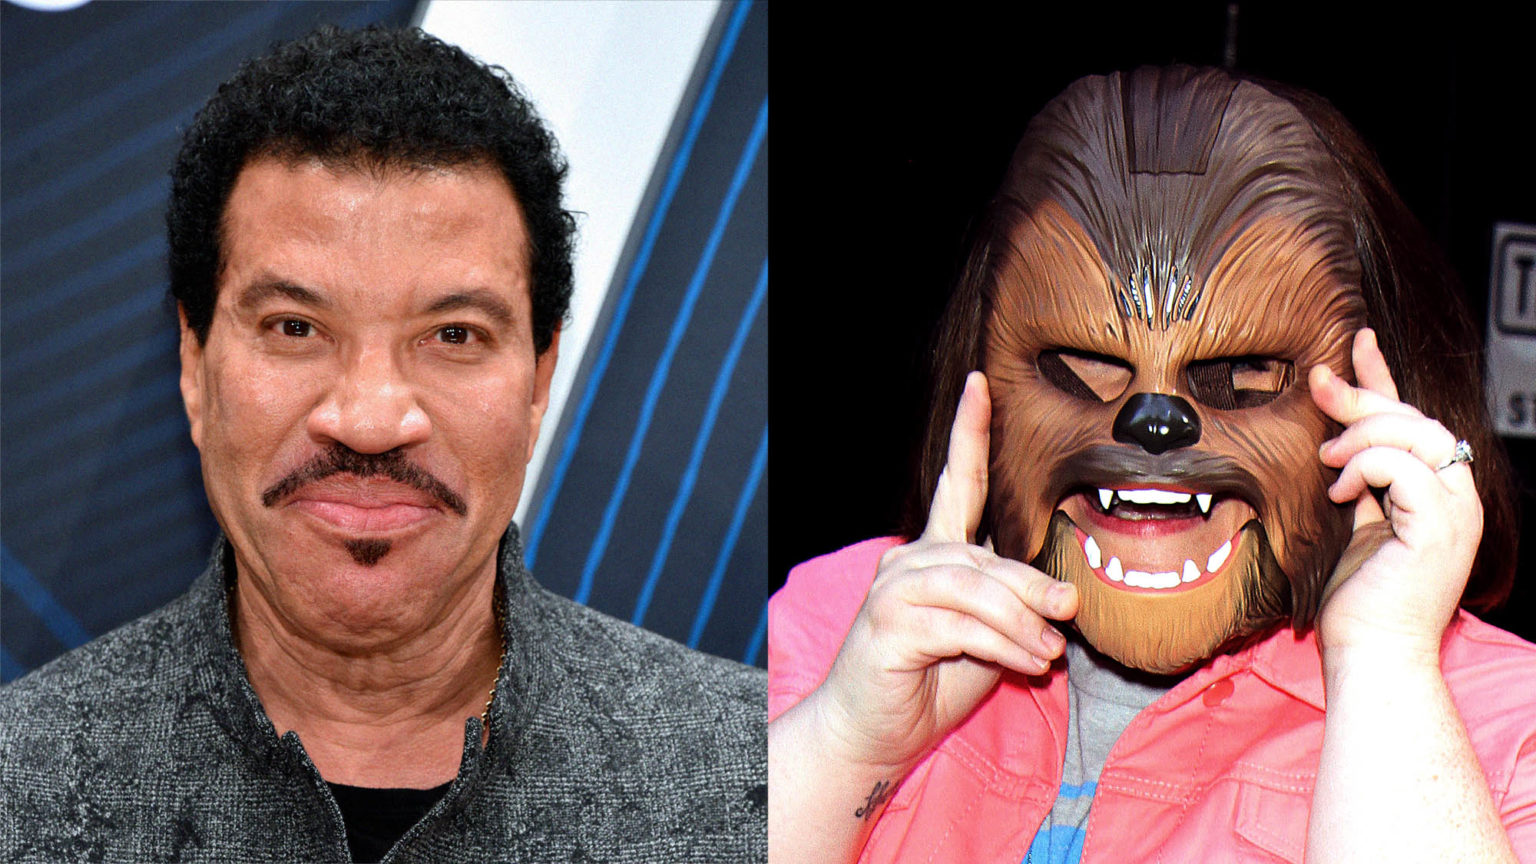 Heartwarming Lionel Richie And Chewbacca Mom Have Buried The Hatchet